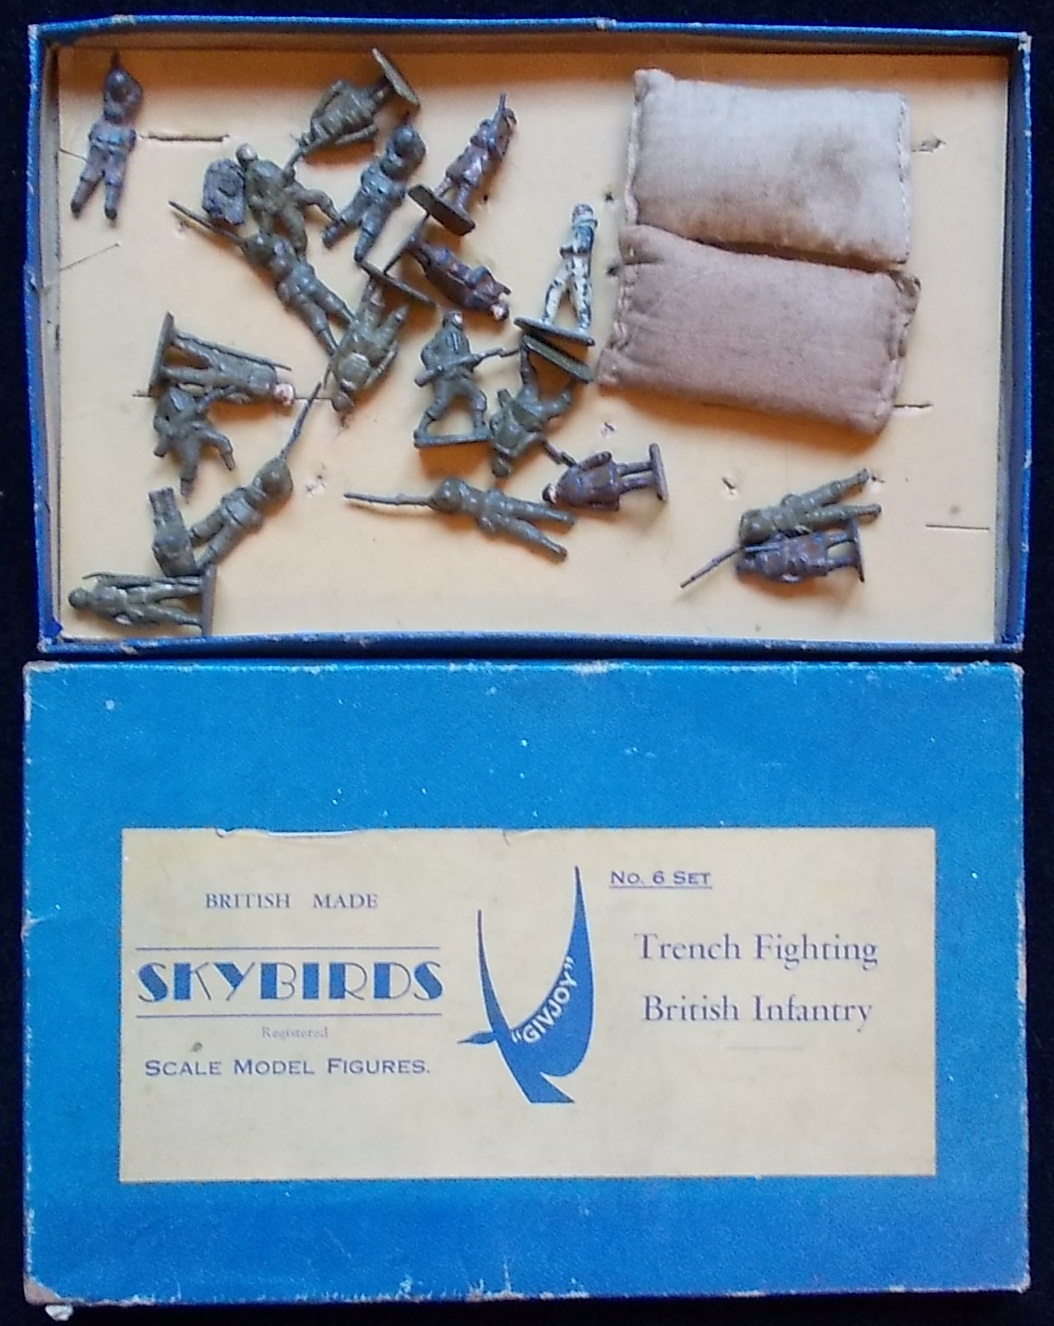 Skybirds. Set 6. Trench fighting British infantry. Boxed.